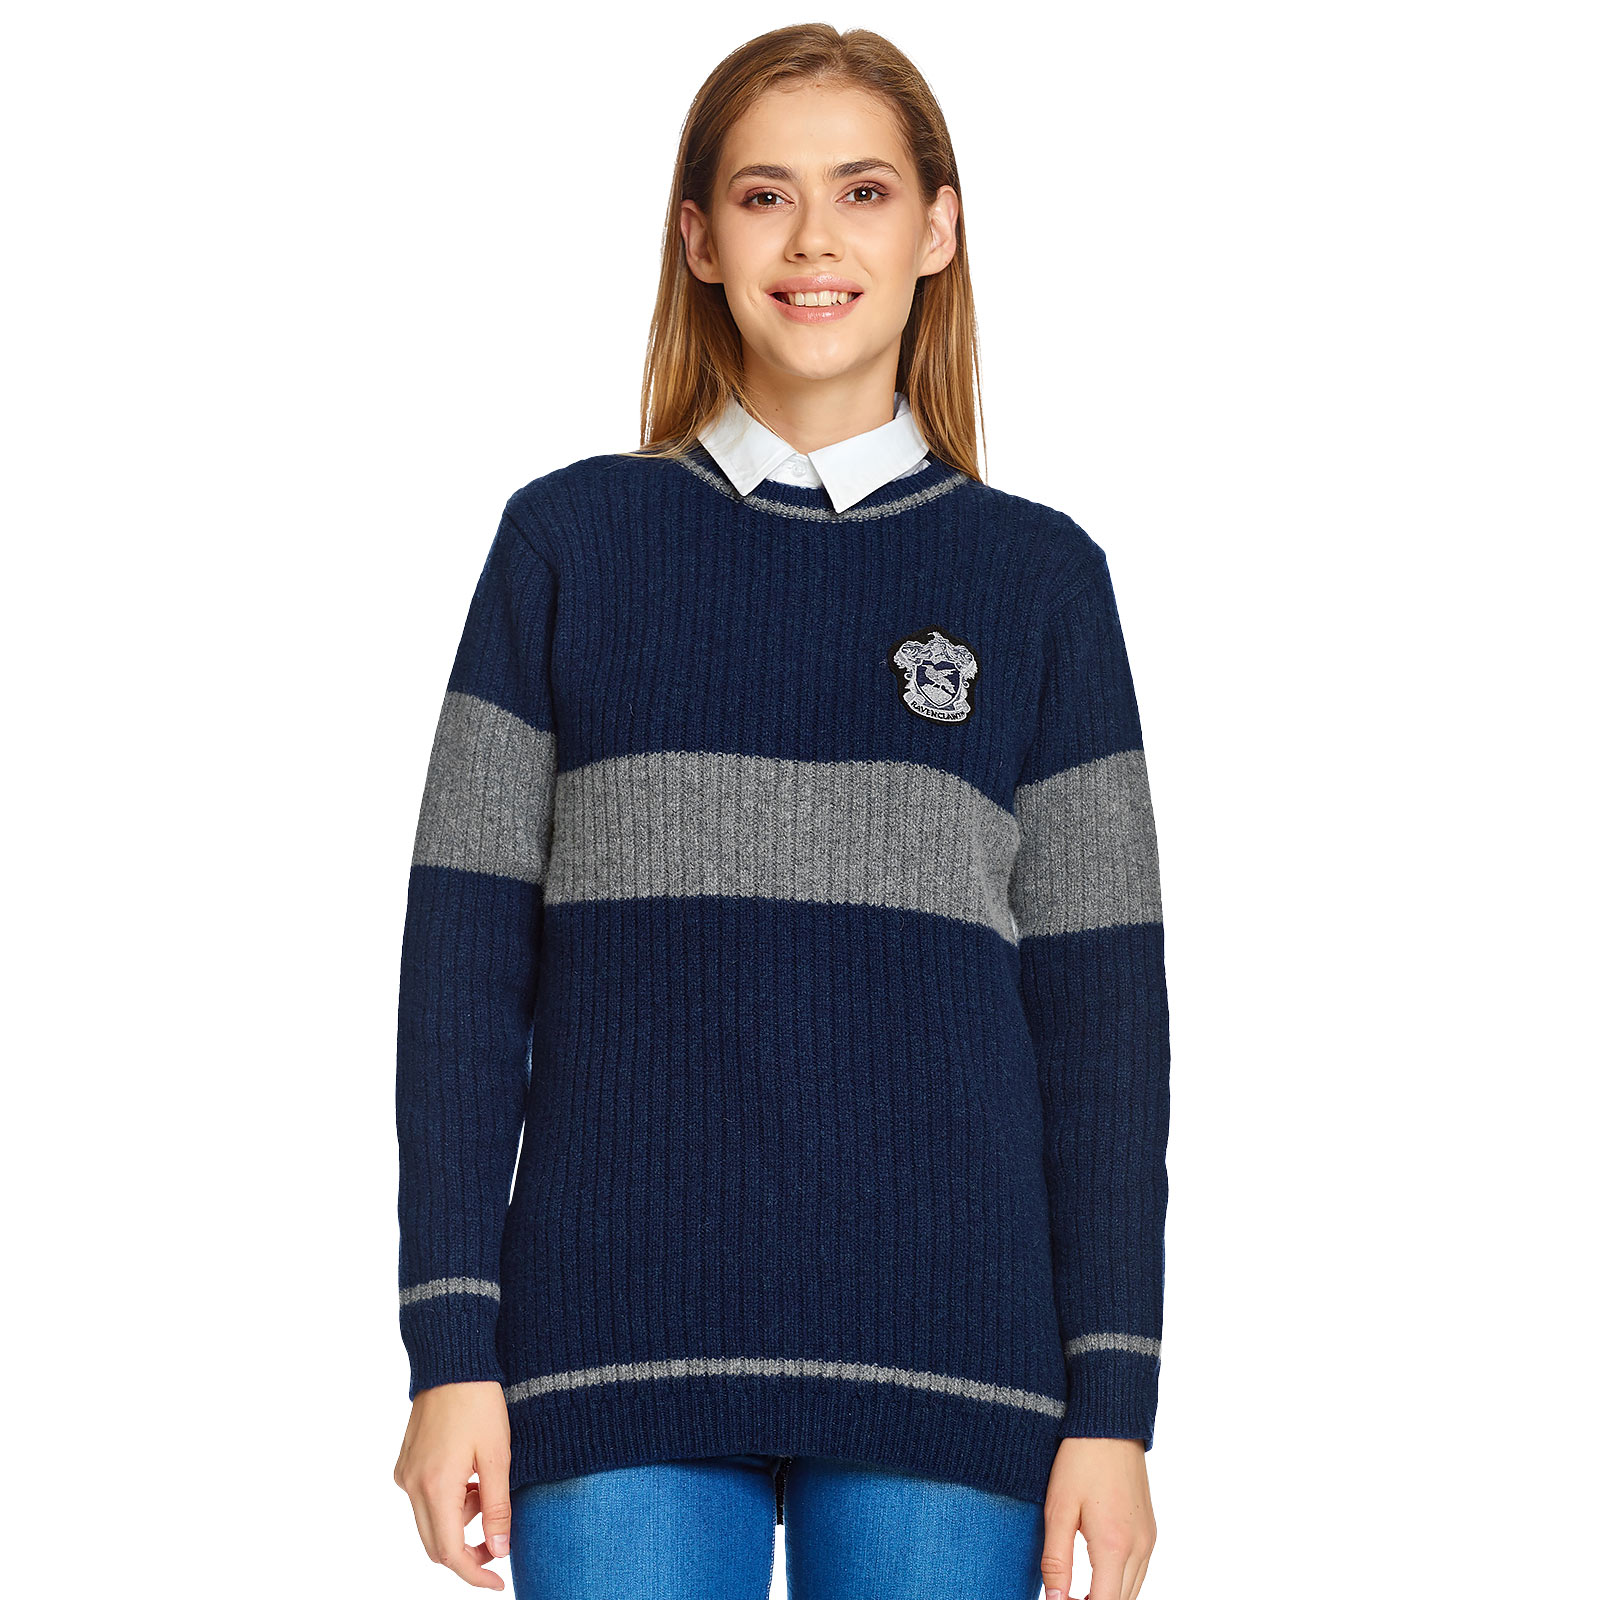 Harry Potter - Quidditch Sweater Ravenclaw